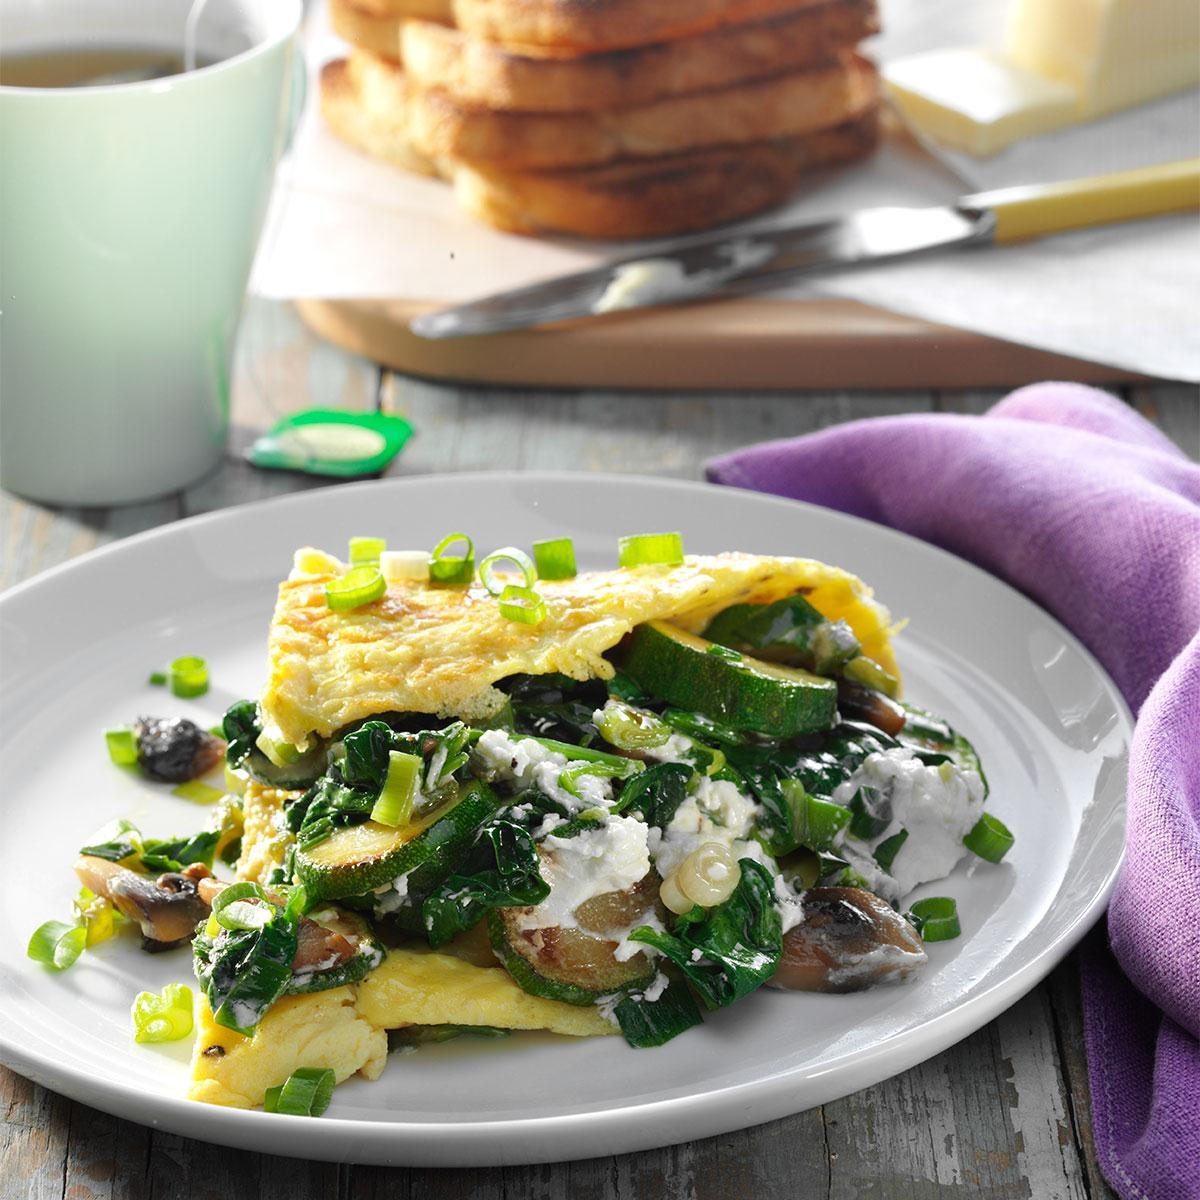 Day 3 Breakfast: Veggie Omelet with Goat Cheese